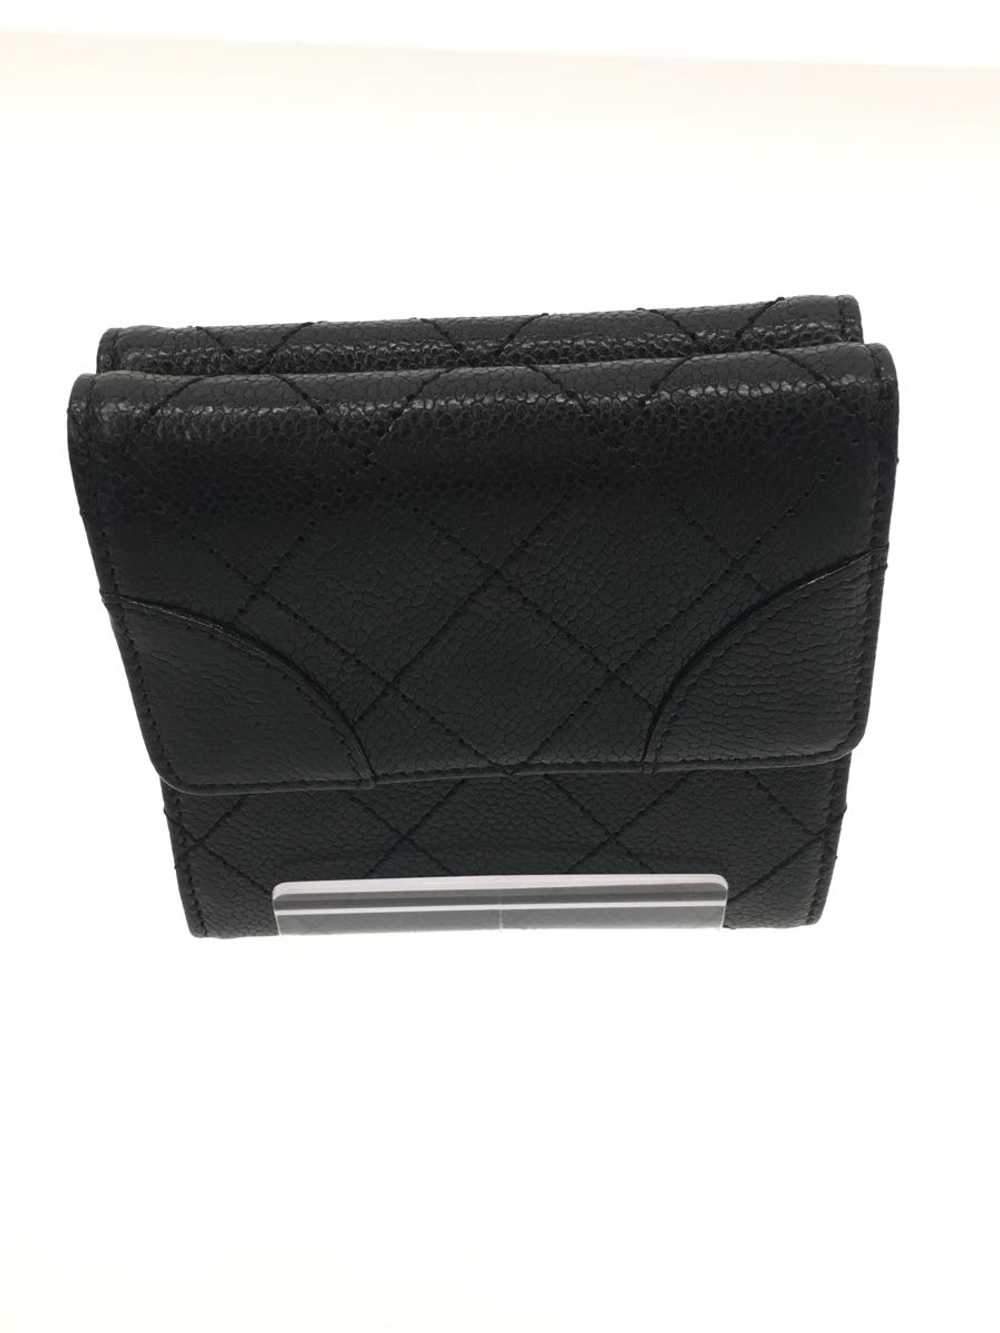 [Used in Japan Wallet] Used Chanel Wallet Purchas… - image 2